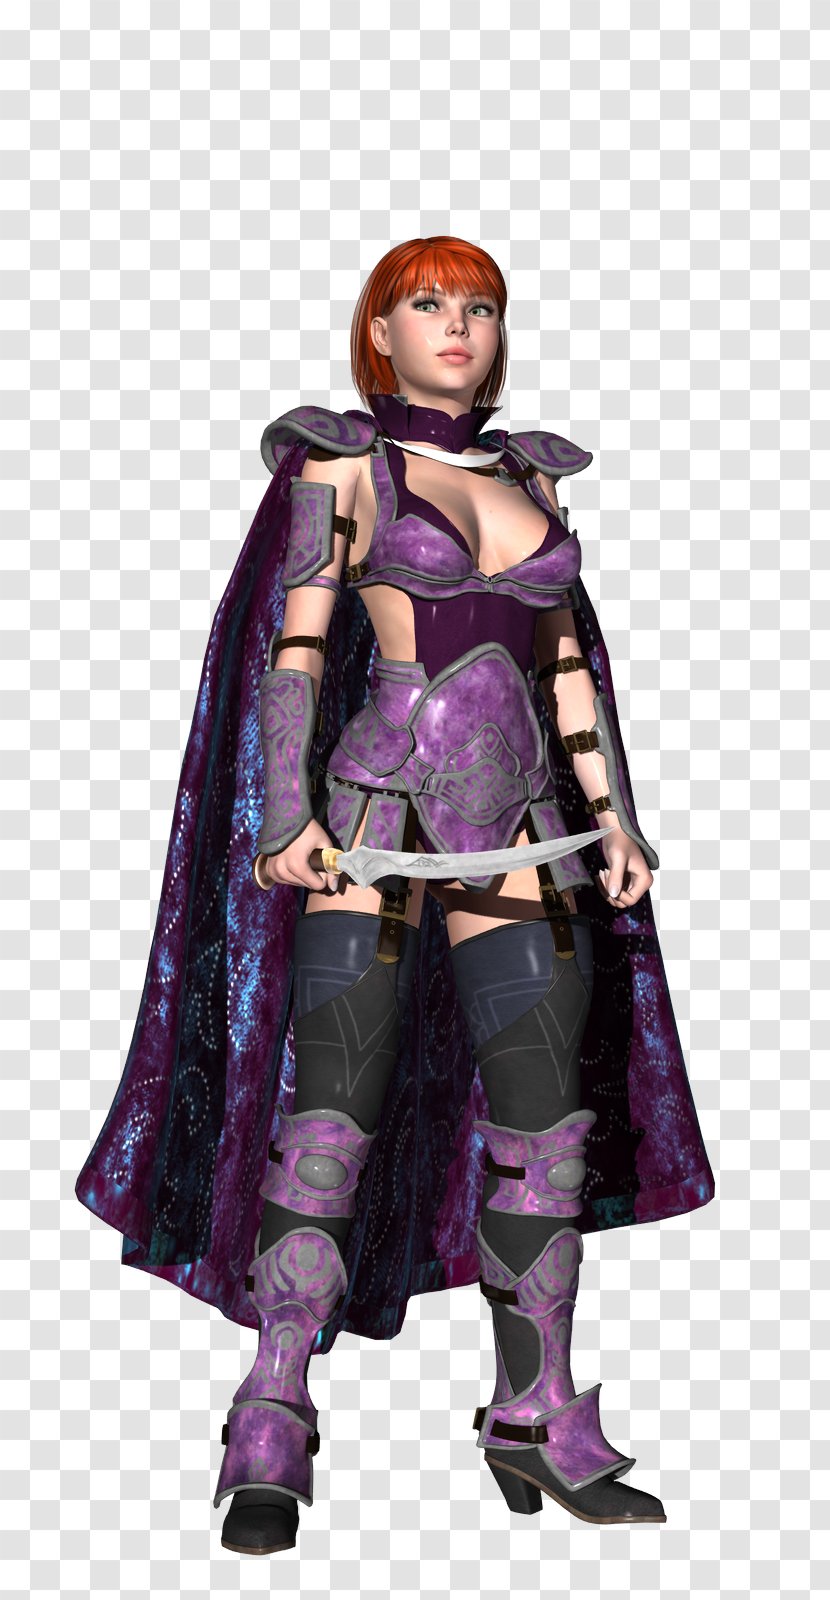 Robe Costume Design Character Fiction - Outerwear - Female Thief Phishing Transparent PNG